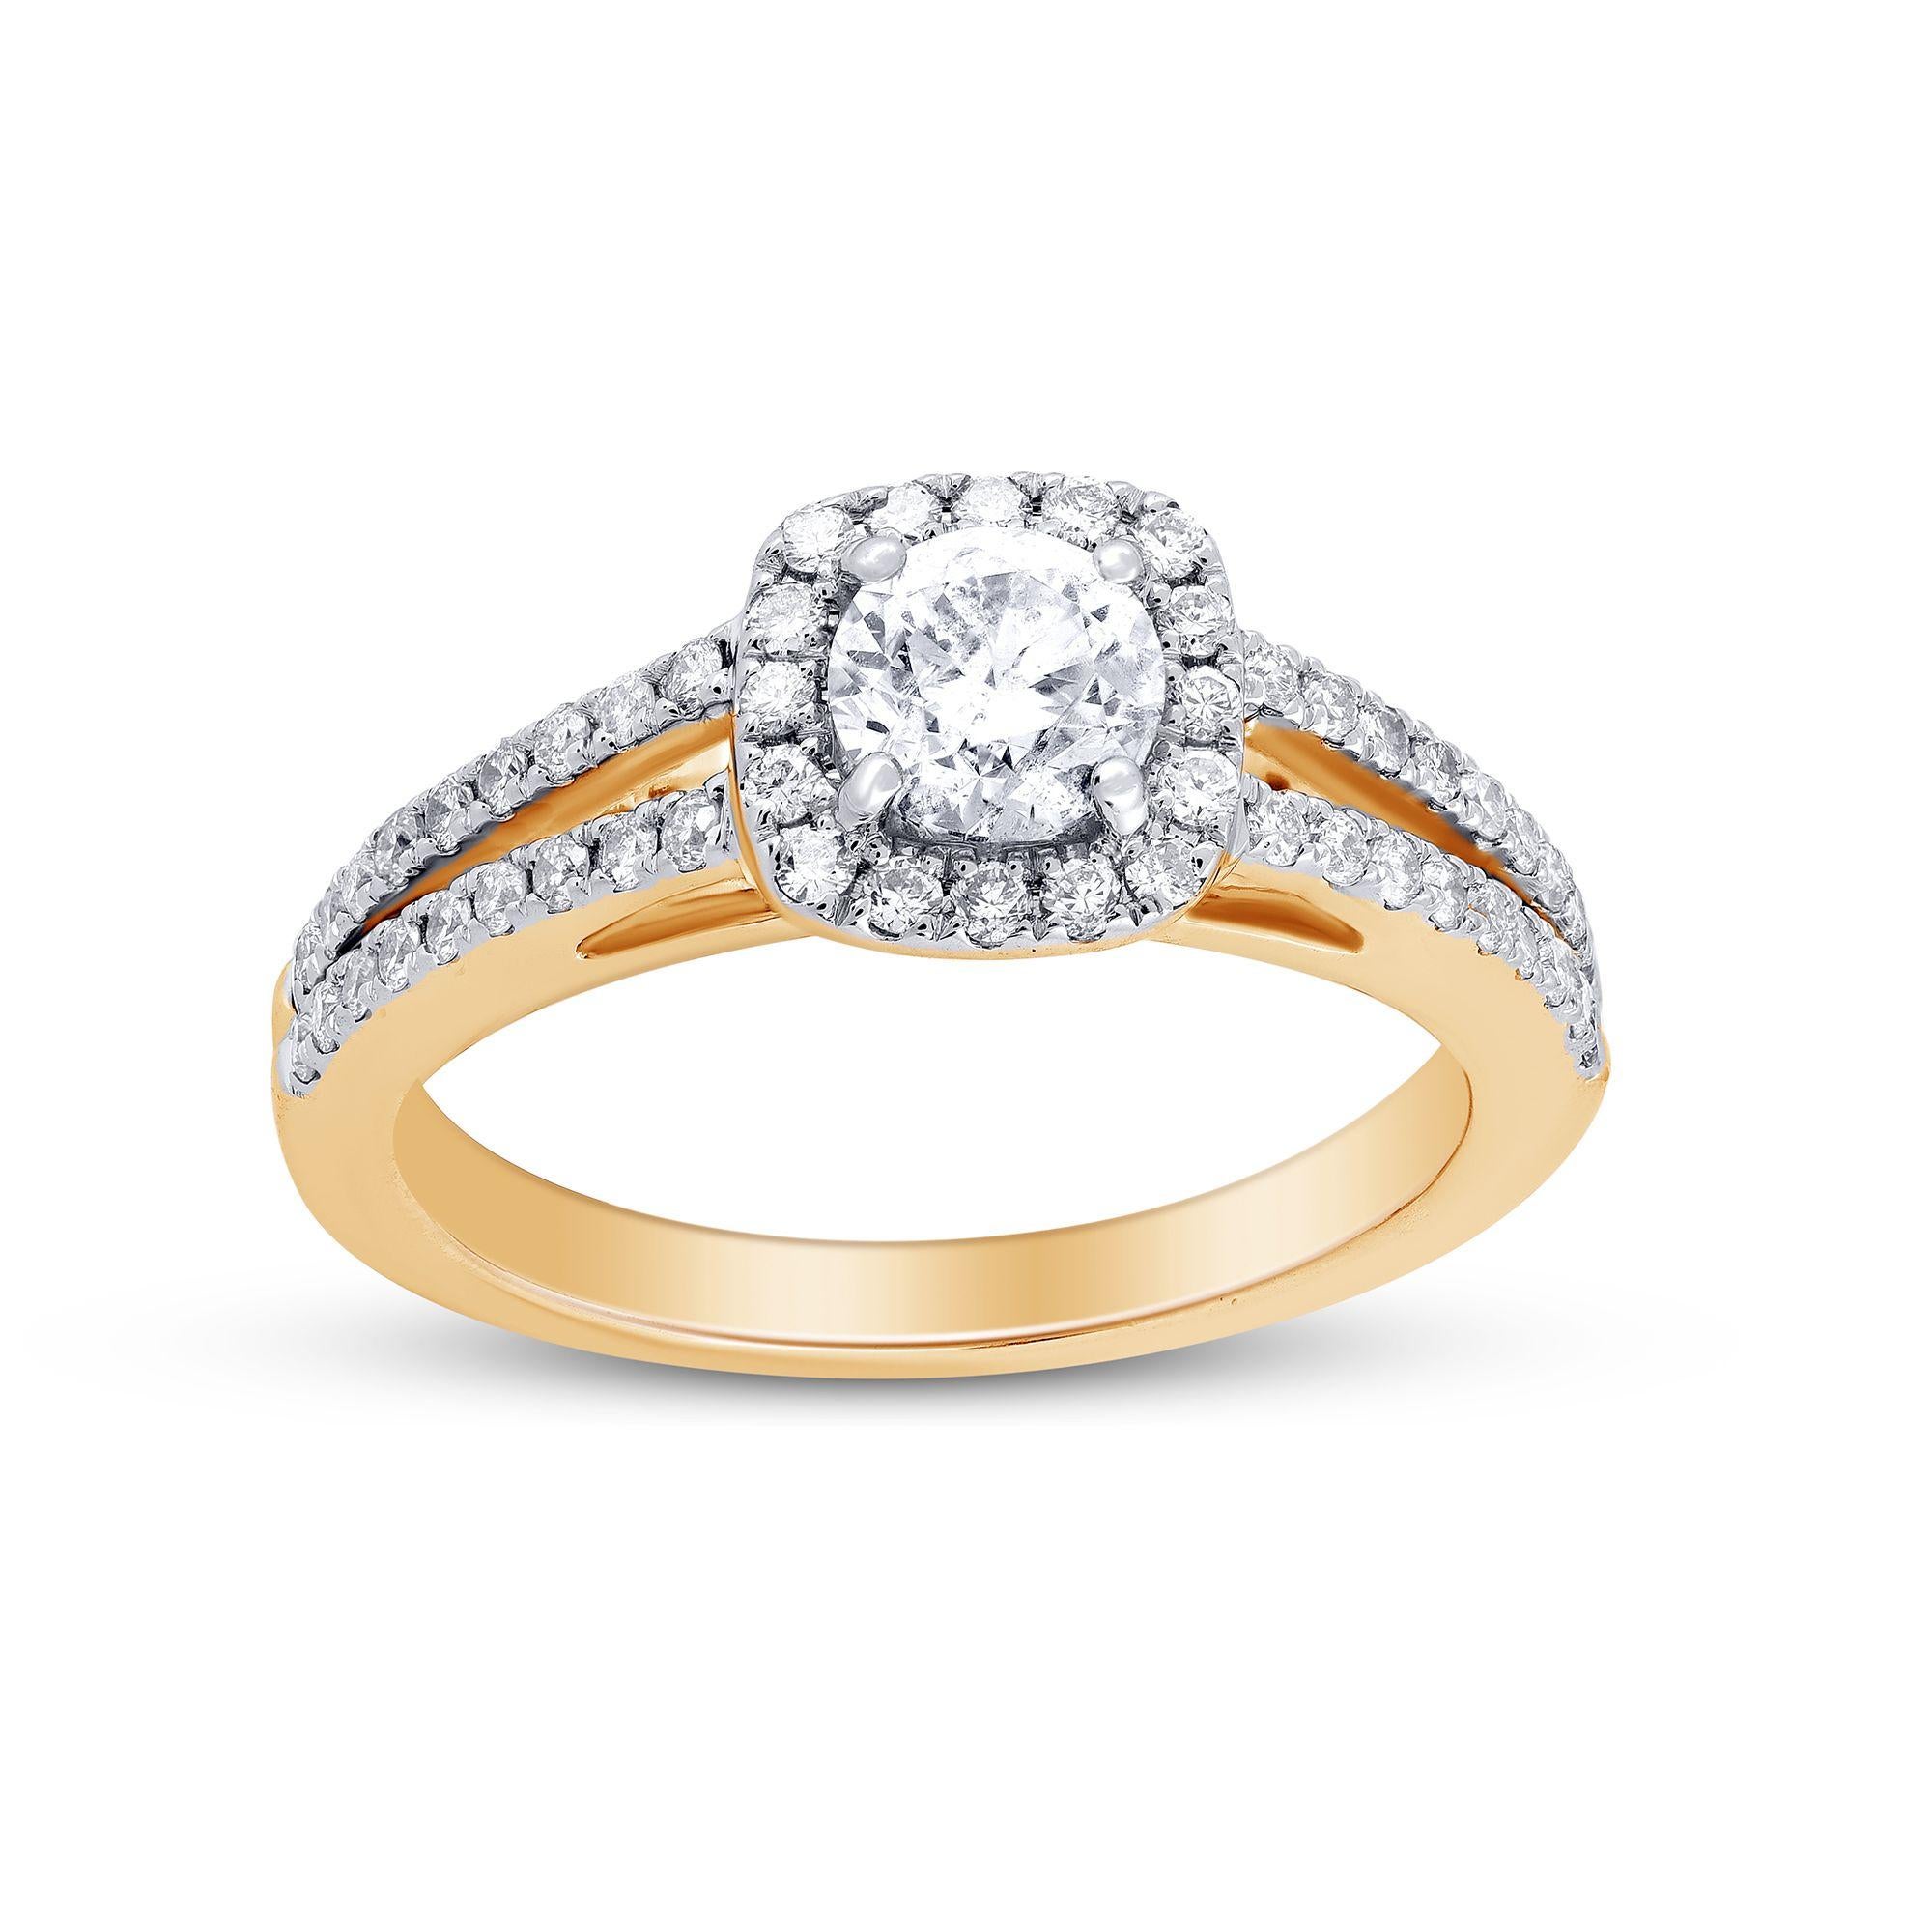 Gorgeous ring that will shine for a lifetime. The ring dazzles with 71 diamonds in prong and micropave setting. Crafted in 14 Karat gold, diamonds are graded I-J Color, SI2-I1 Clarity. 
